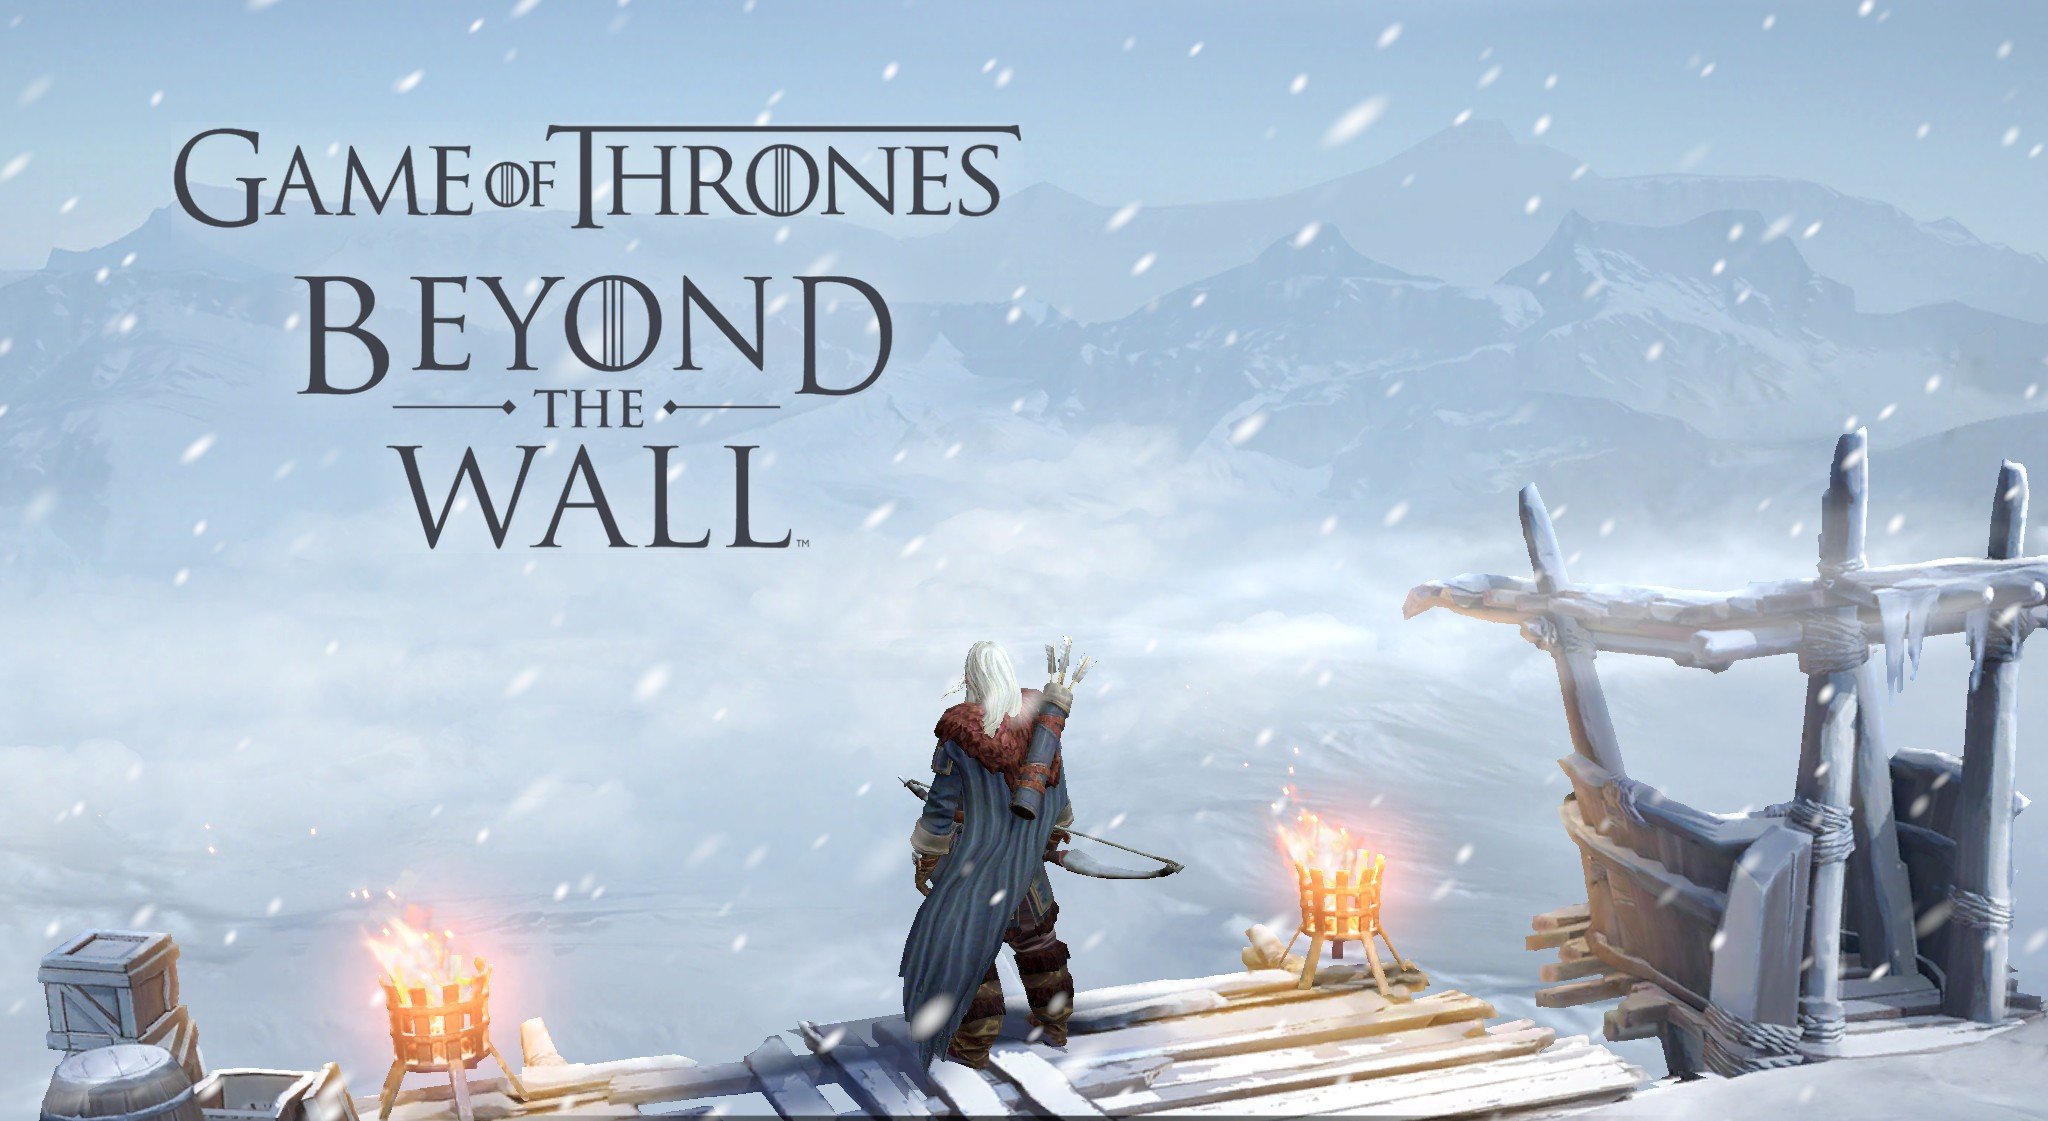 Games of Thrones Beyond the Wall [expert guide]: here are the Best tips and tricks you need to know to win! Read to find out. 7